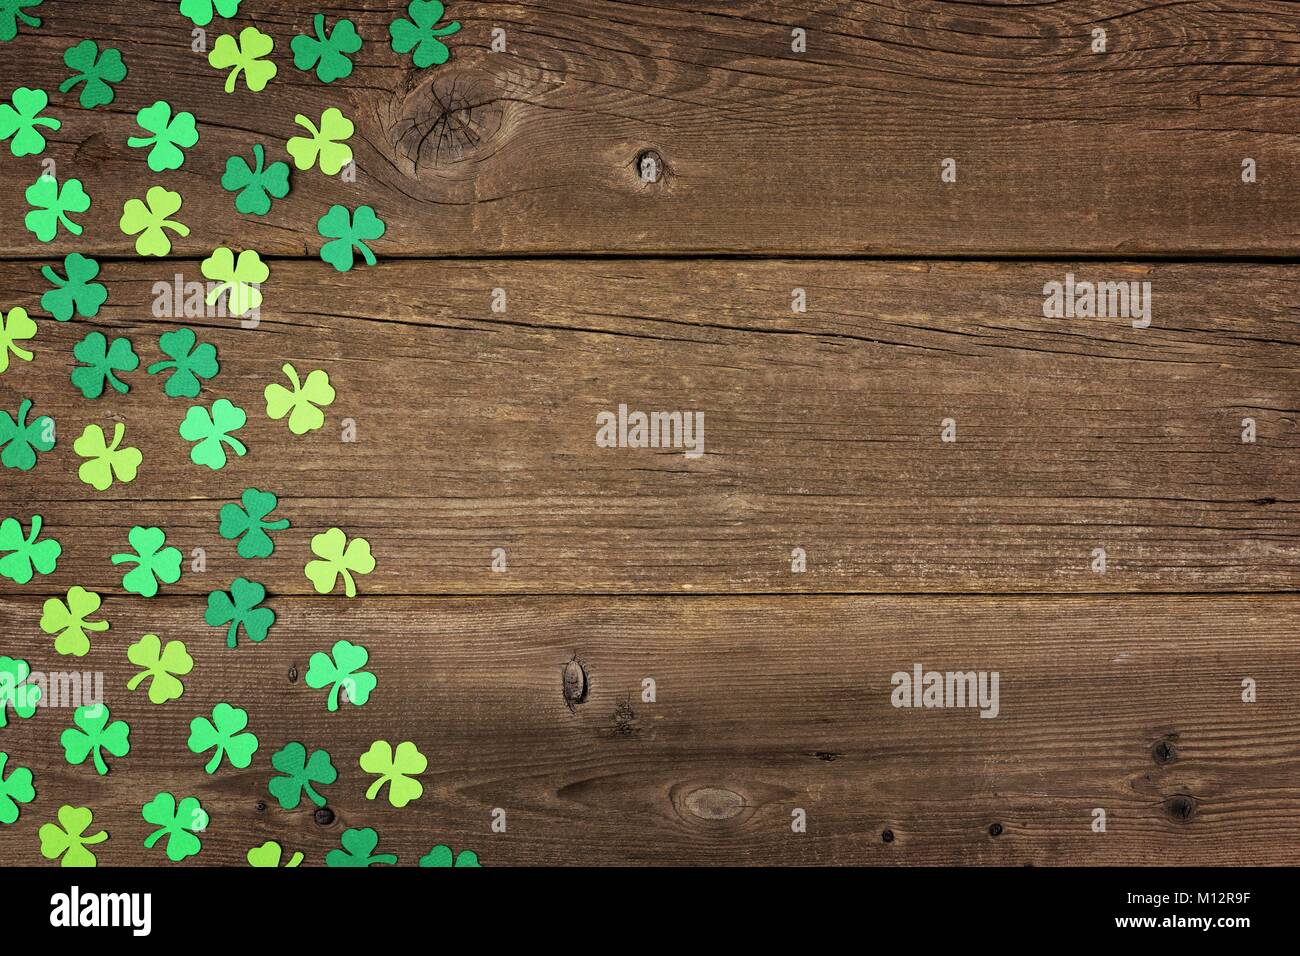 St Patricks Day side border of paper shamrocks over an old rustic wood background Stock Photo